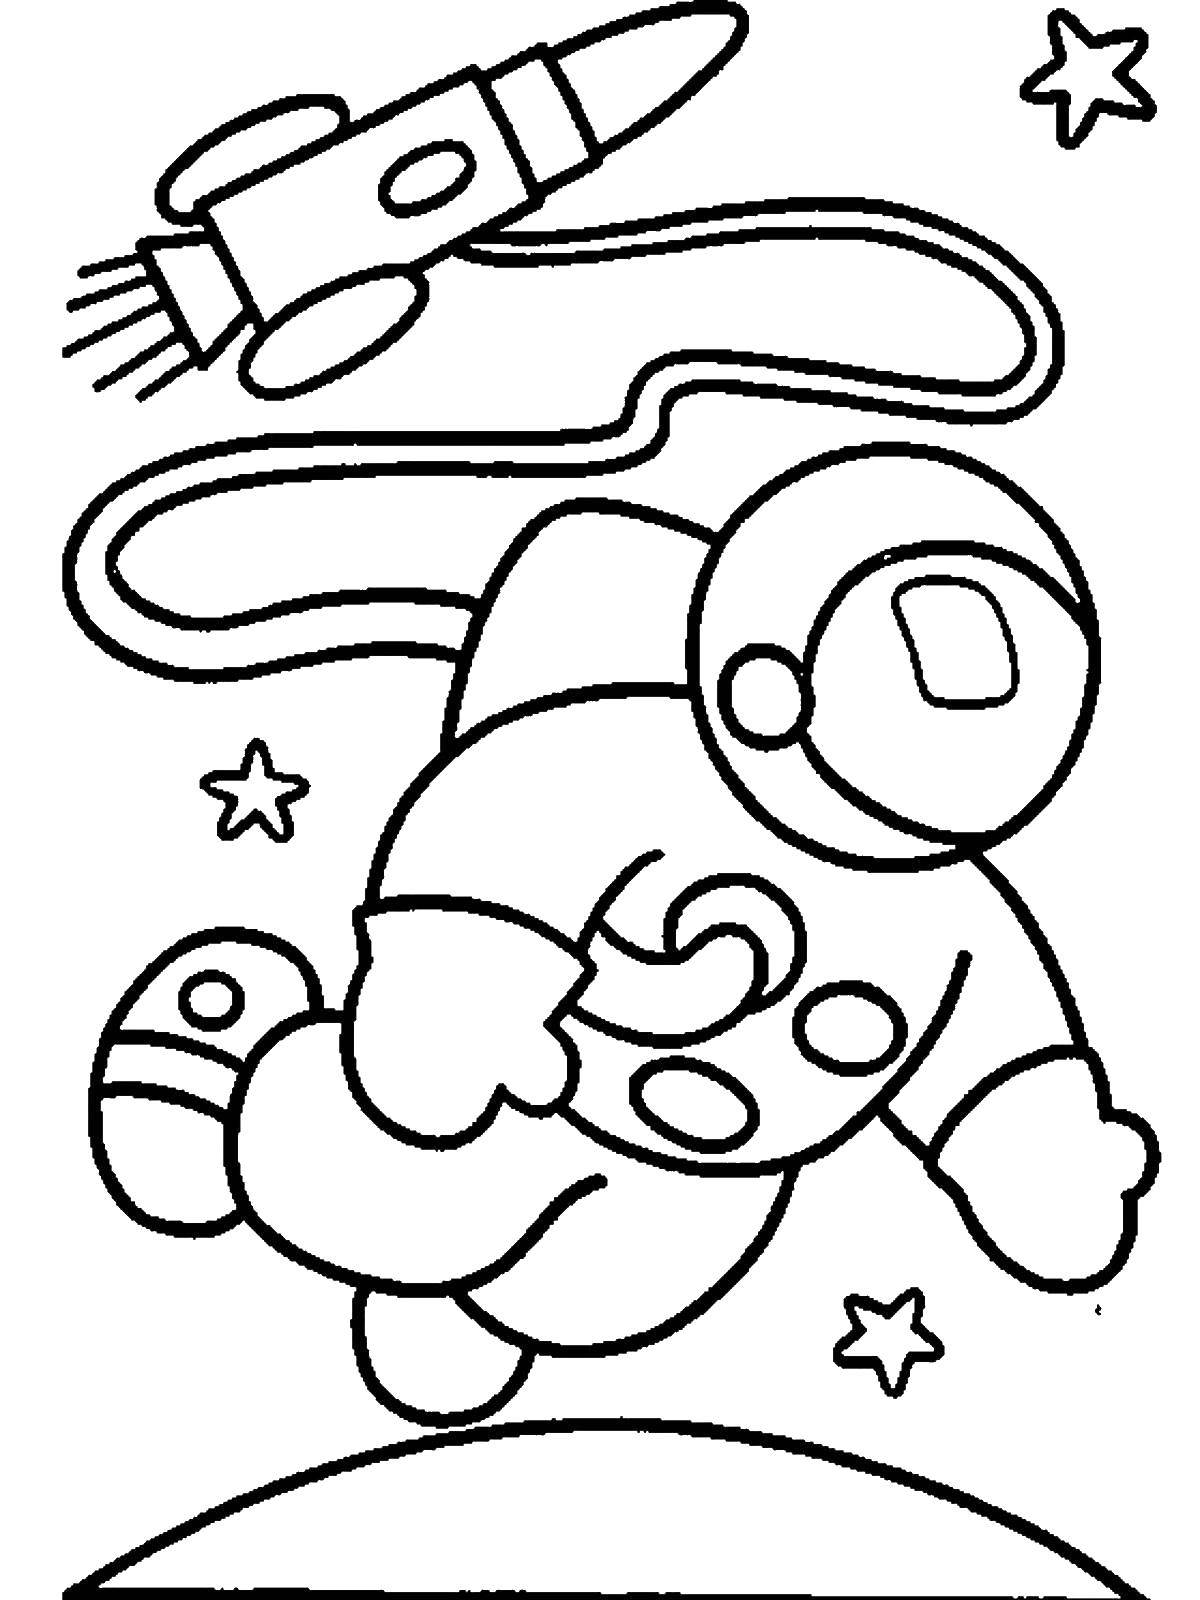 Coloring Astronaut. Category a profession. Tags:  profession, astronaut, rocket.